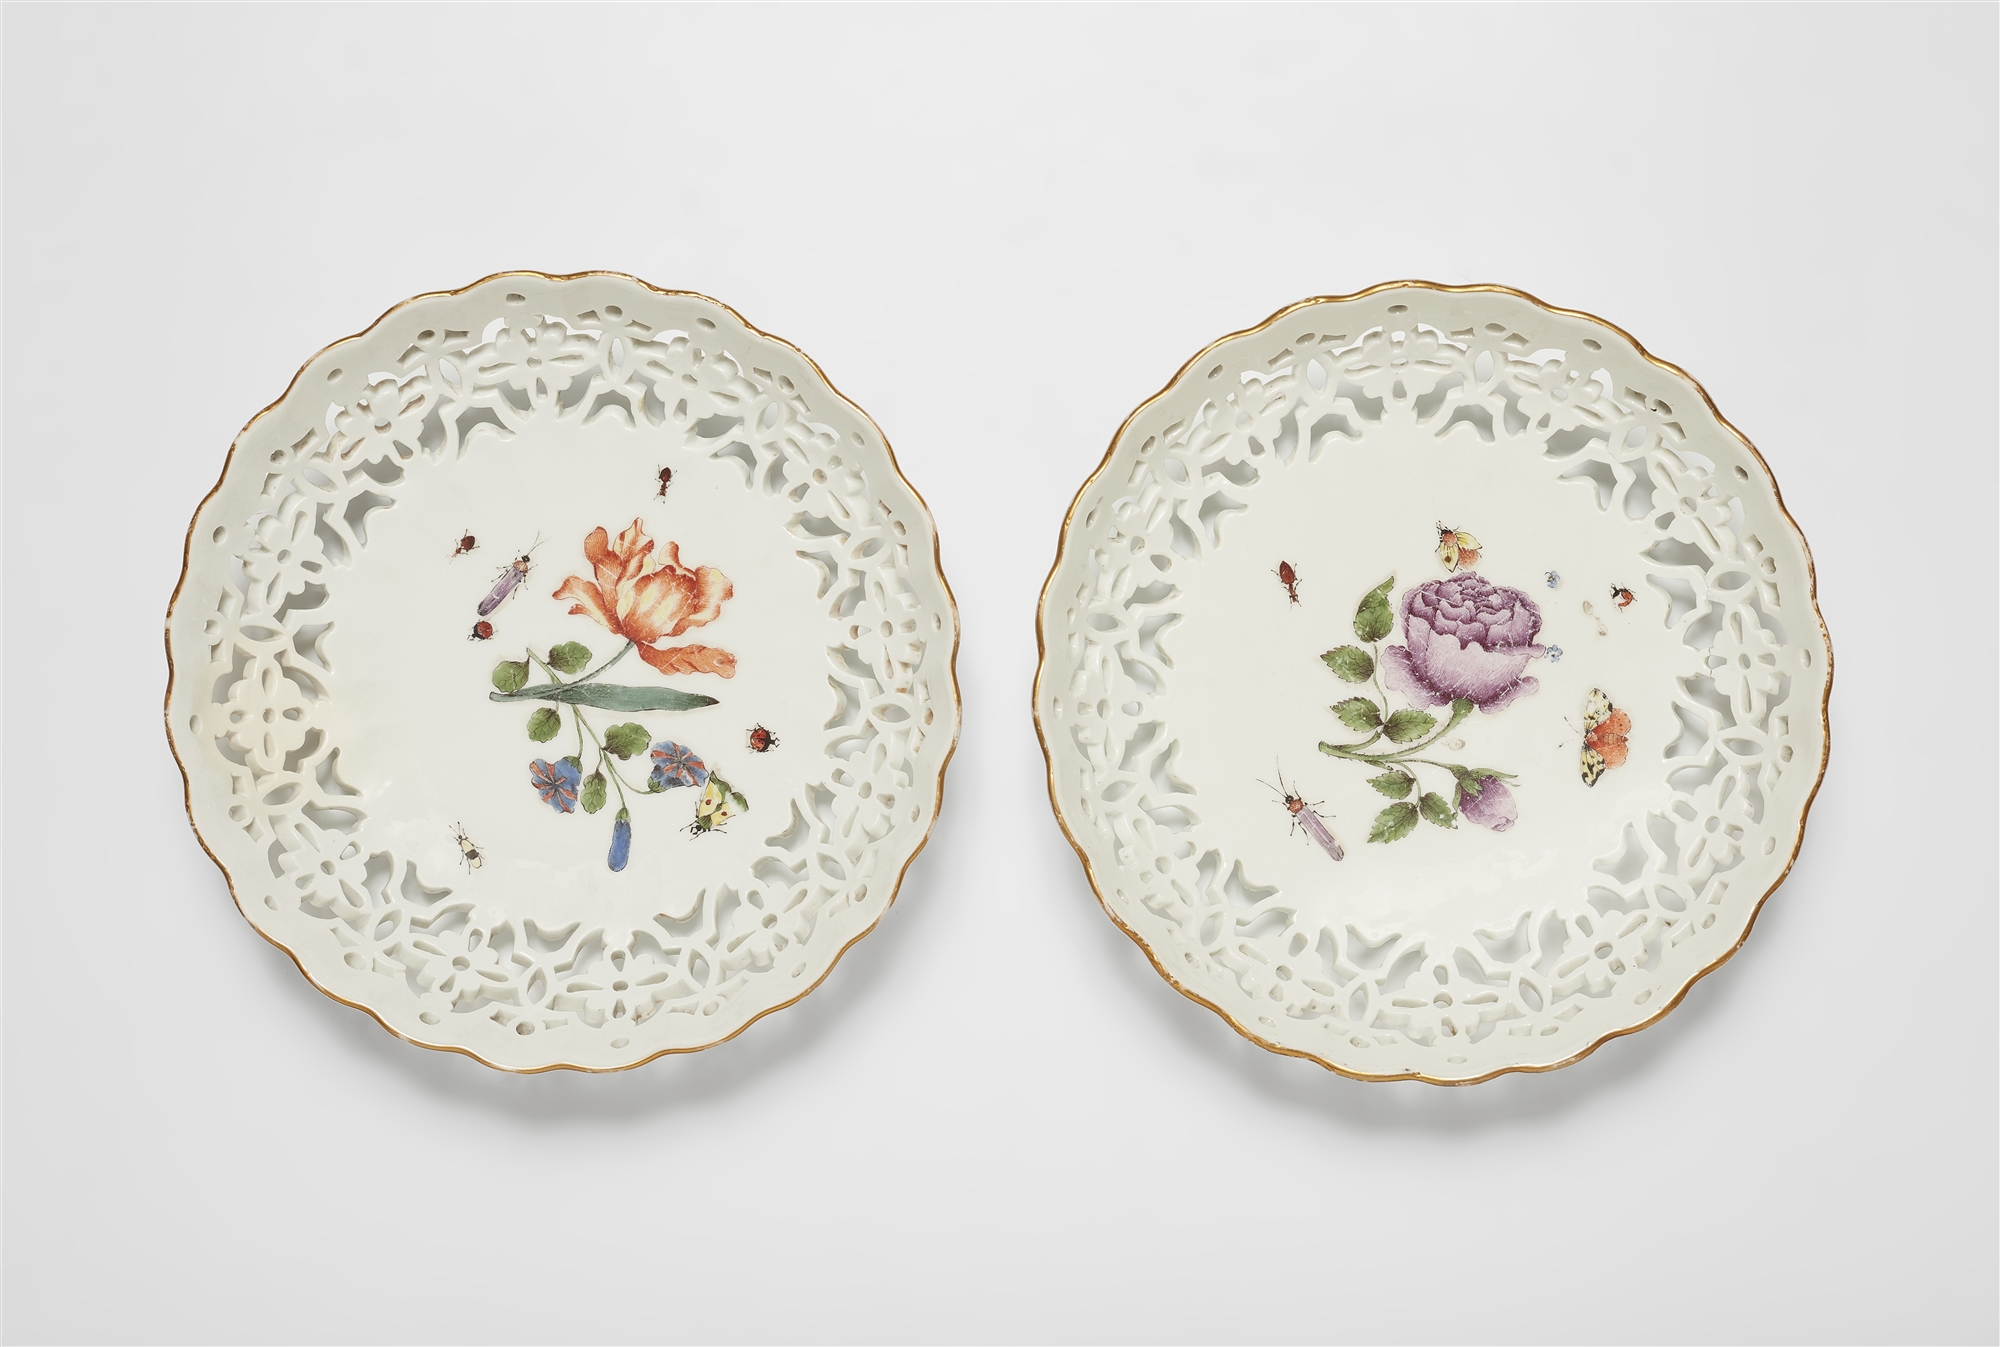 A pair of Meissen porcelain dessert baskets with woodcut style flowers and insects